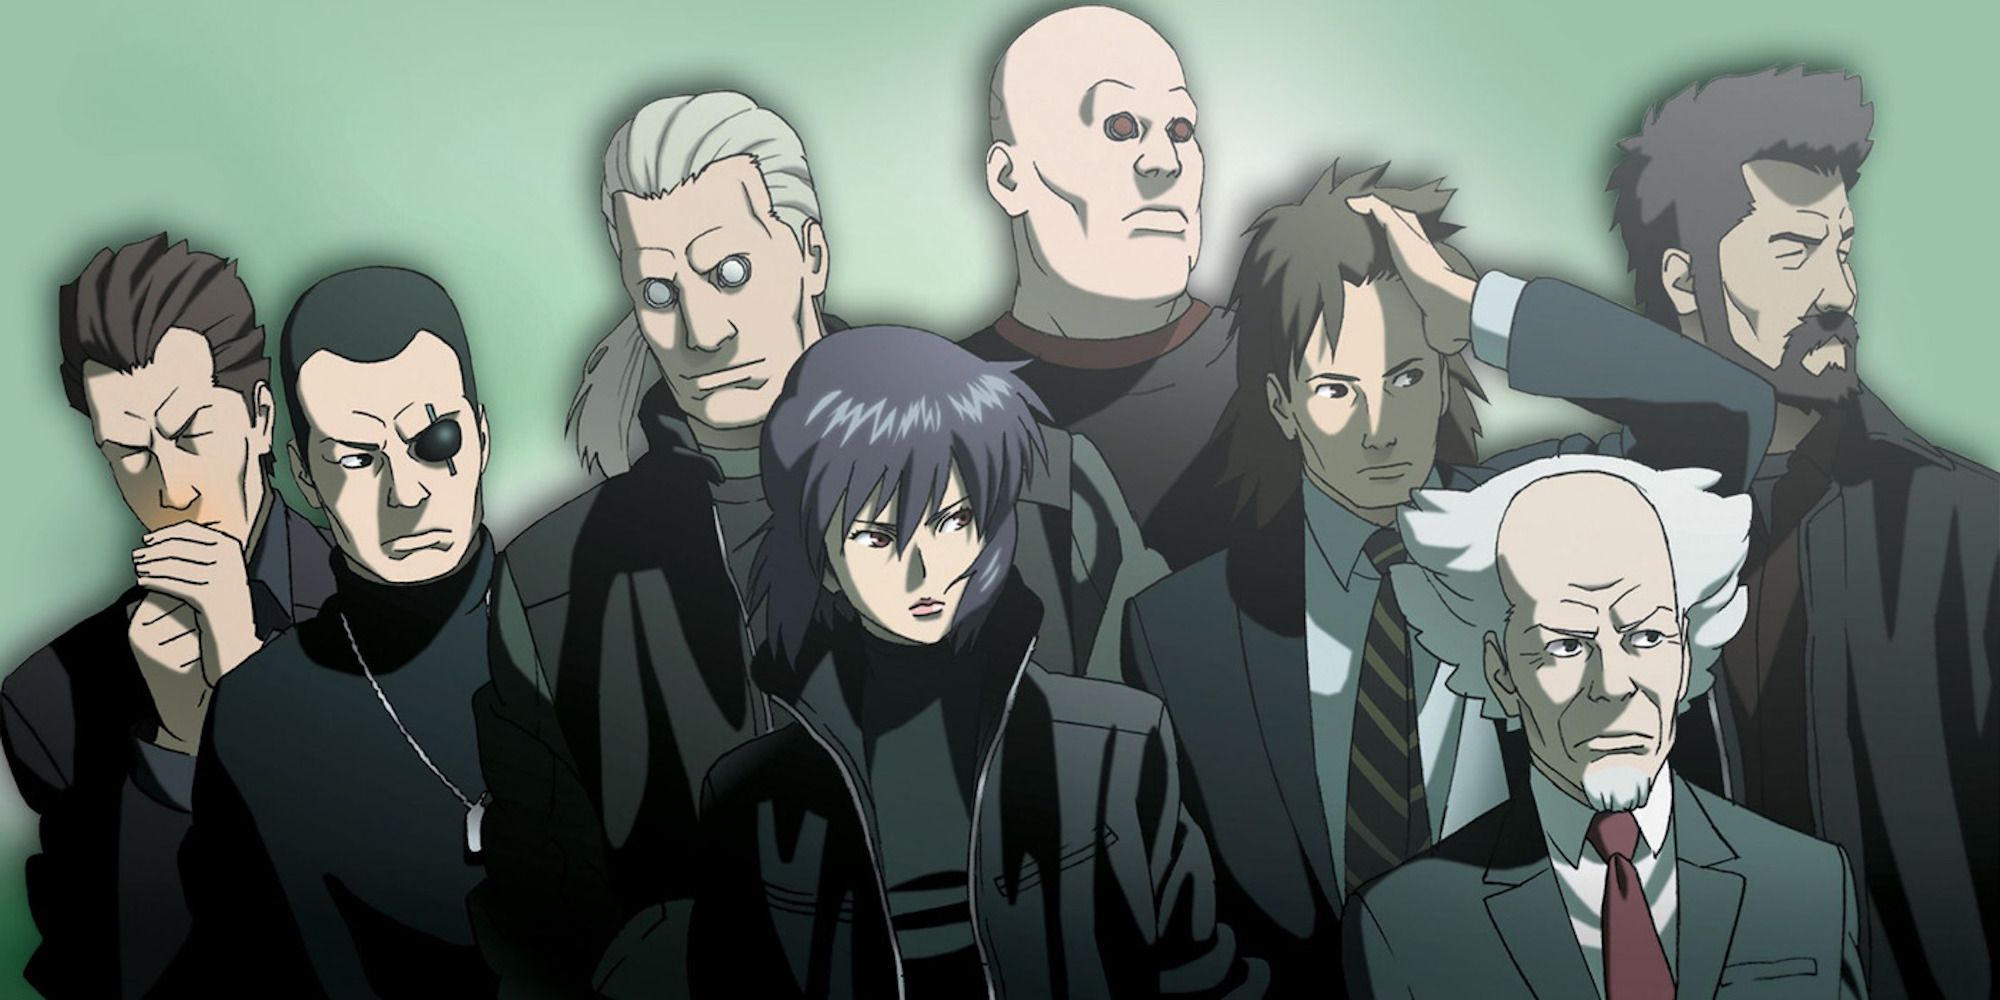 Promo art featuring characters from Ghost In The Shell: Stand Alone Complex